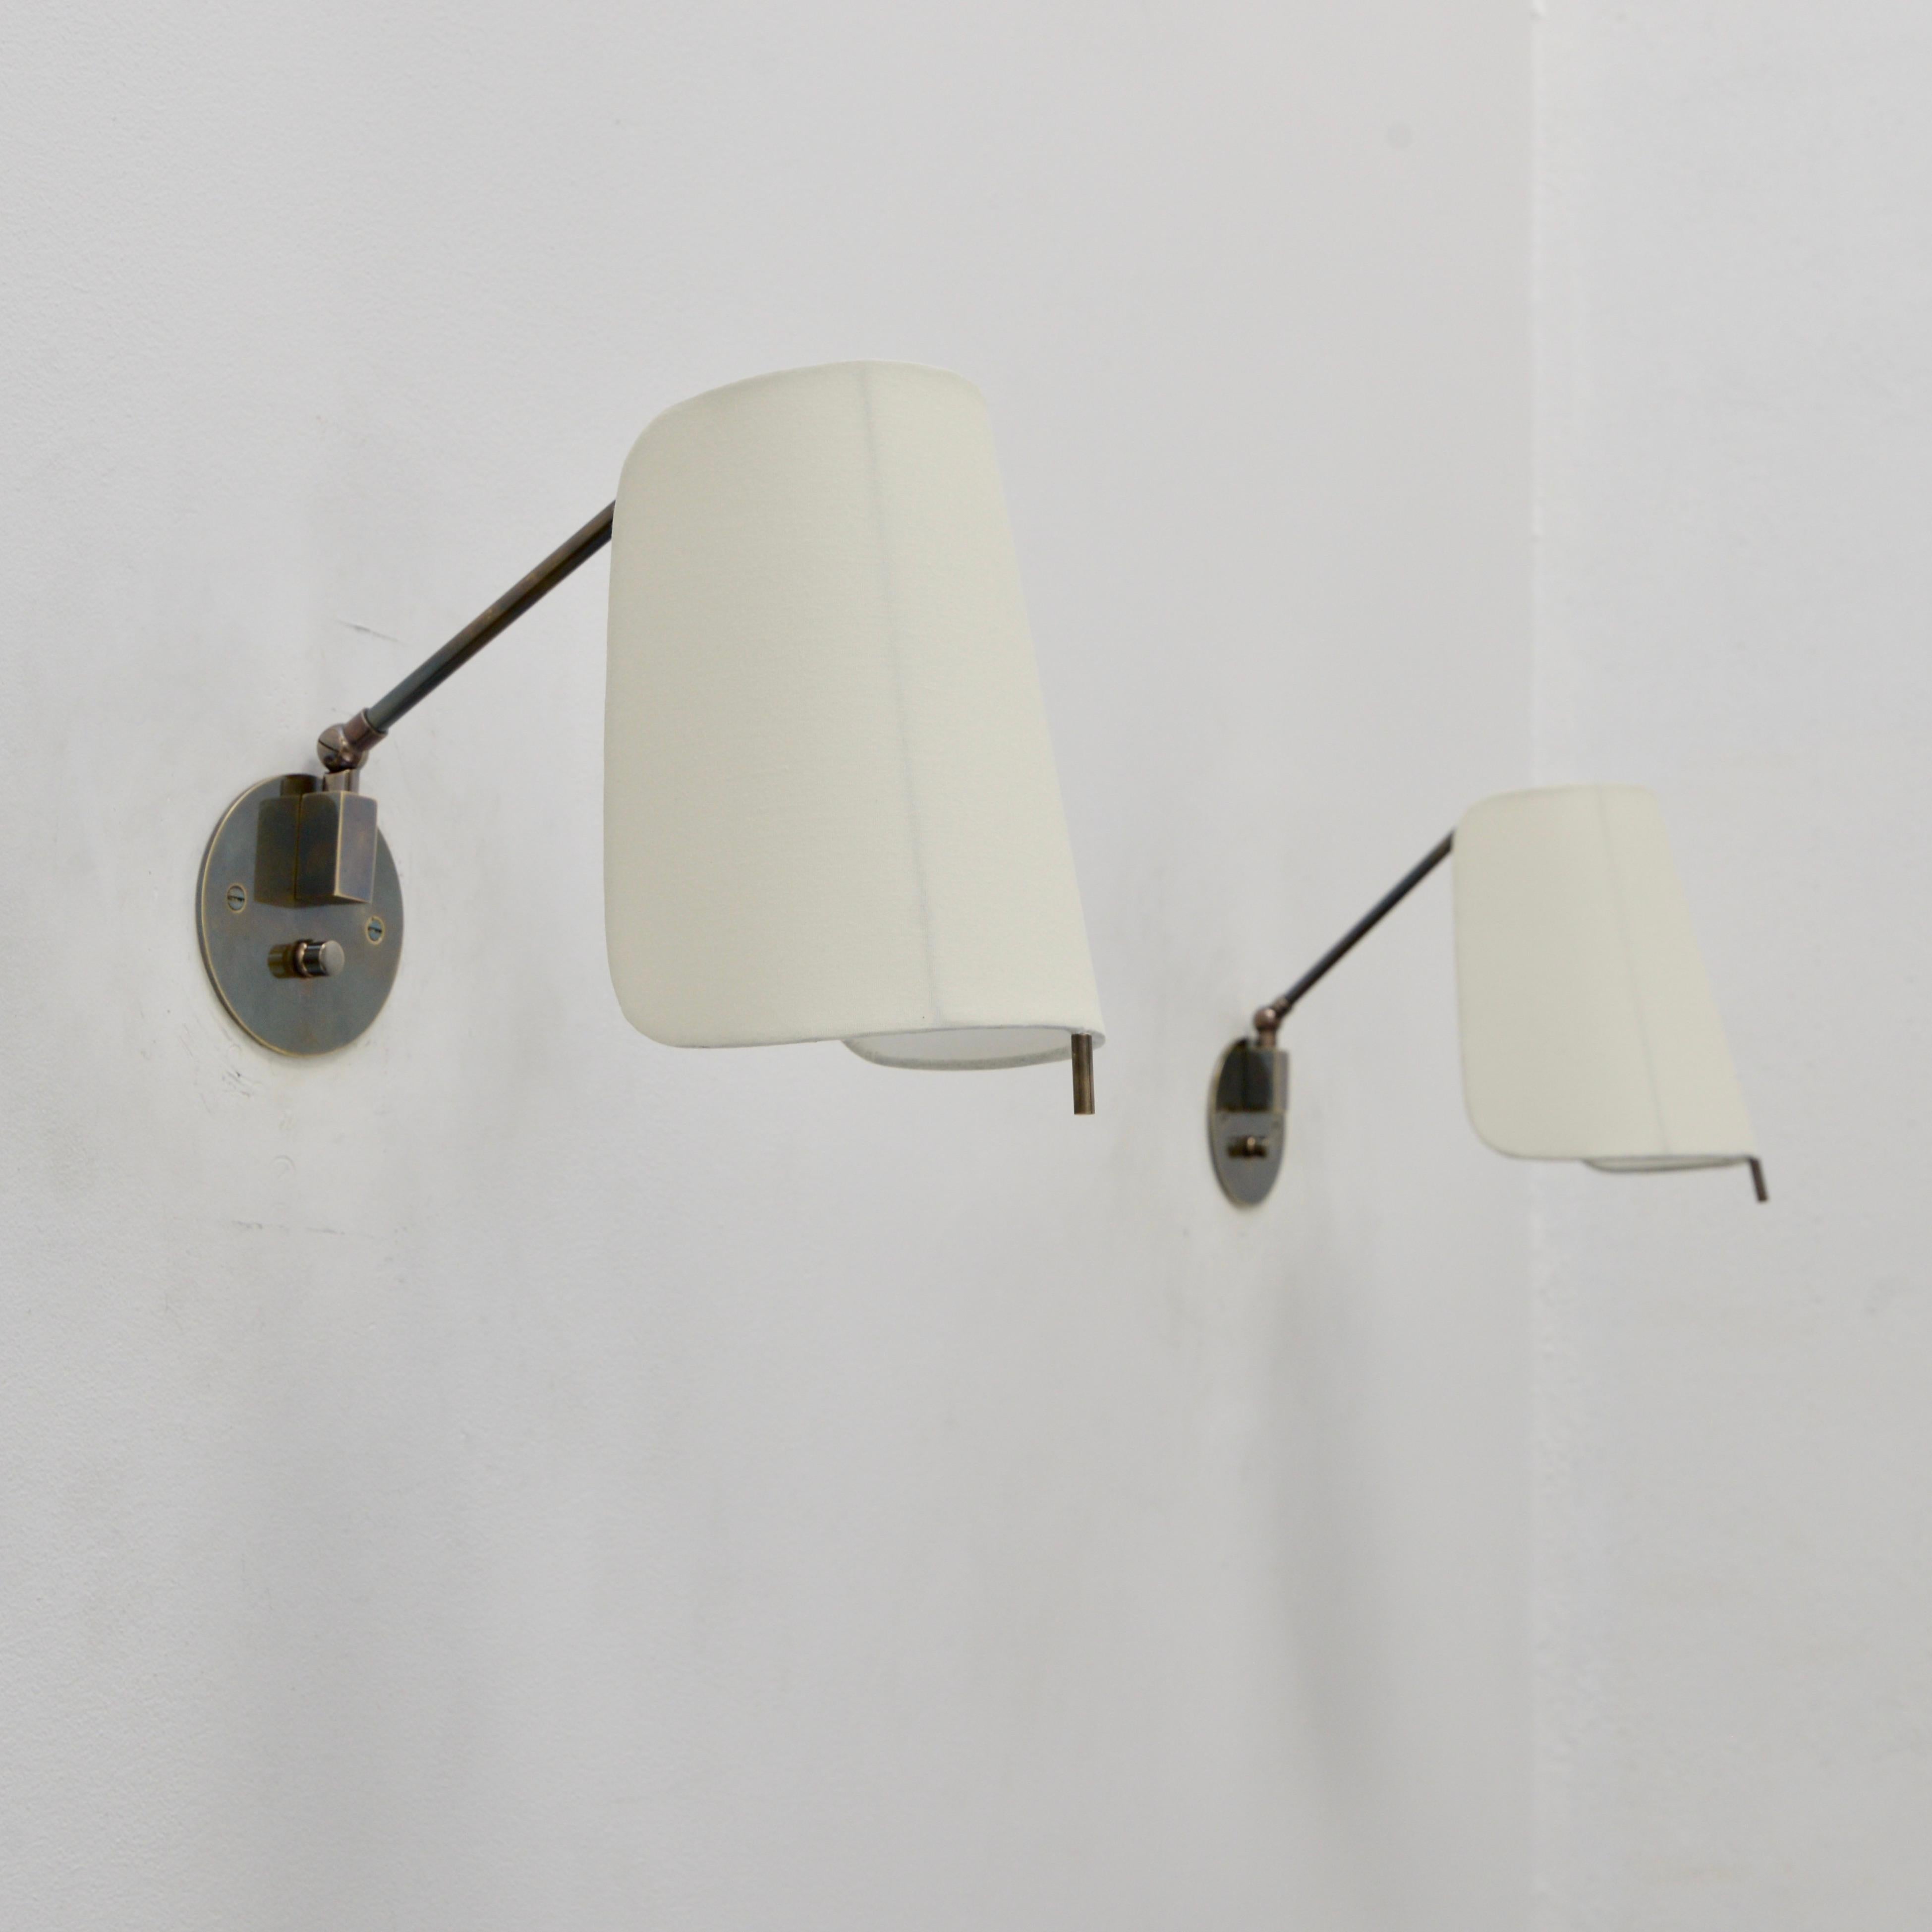 Part of Lumfardo Luminaries contemporary collection, the ShiLU Sconce is a fully Directional reading sconce crafted from patinated brass and steel hardware and fabric shade. Classic European Mid-Century Modern design made to order. This fixture can